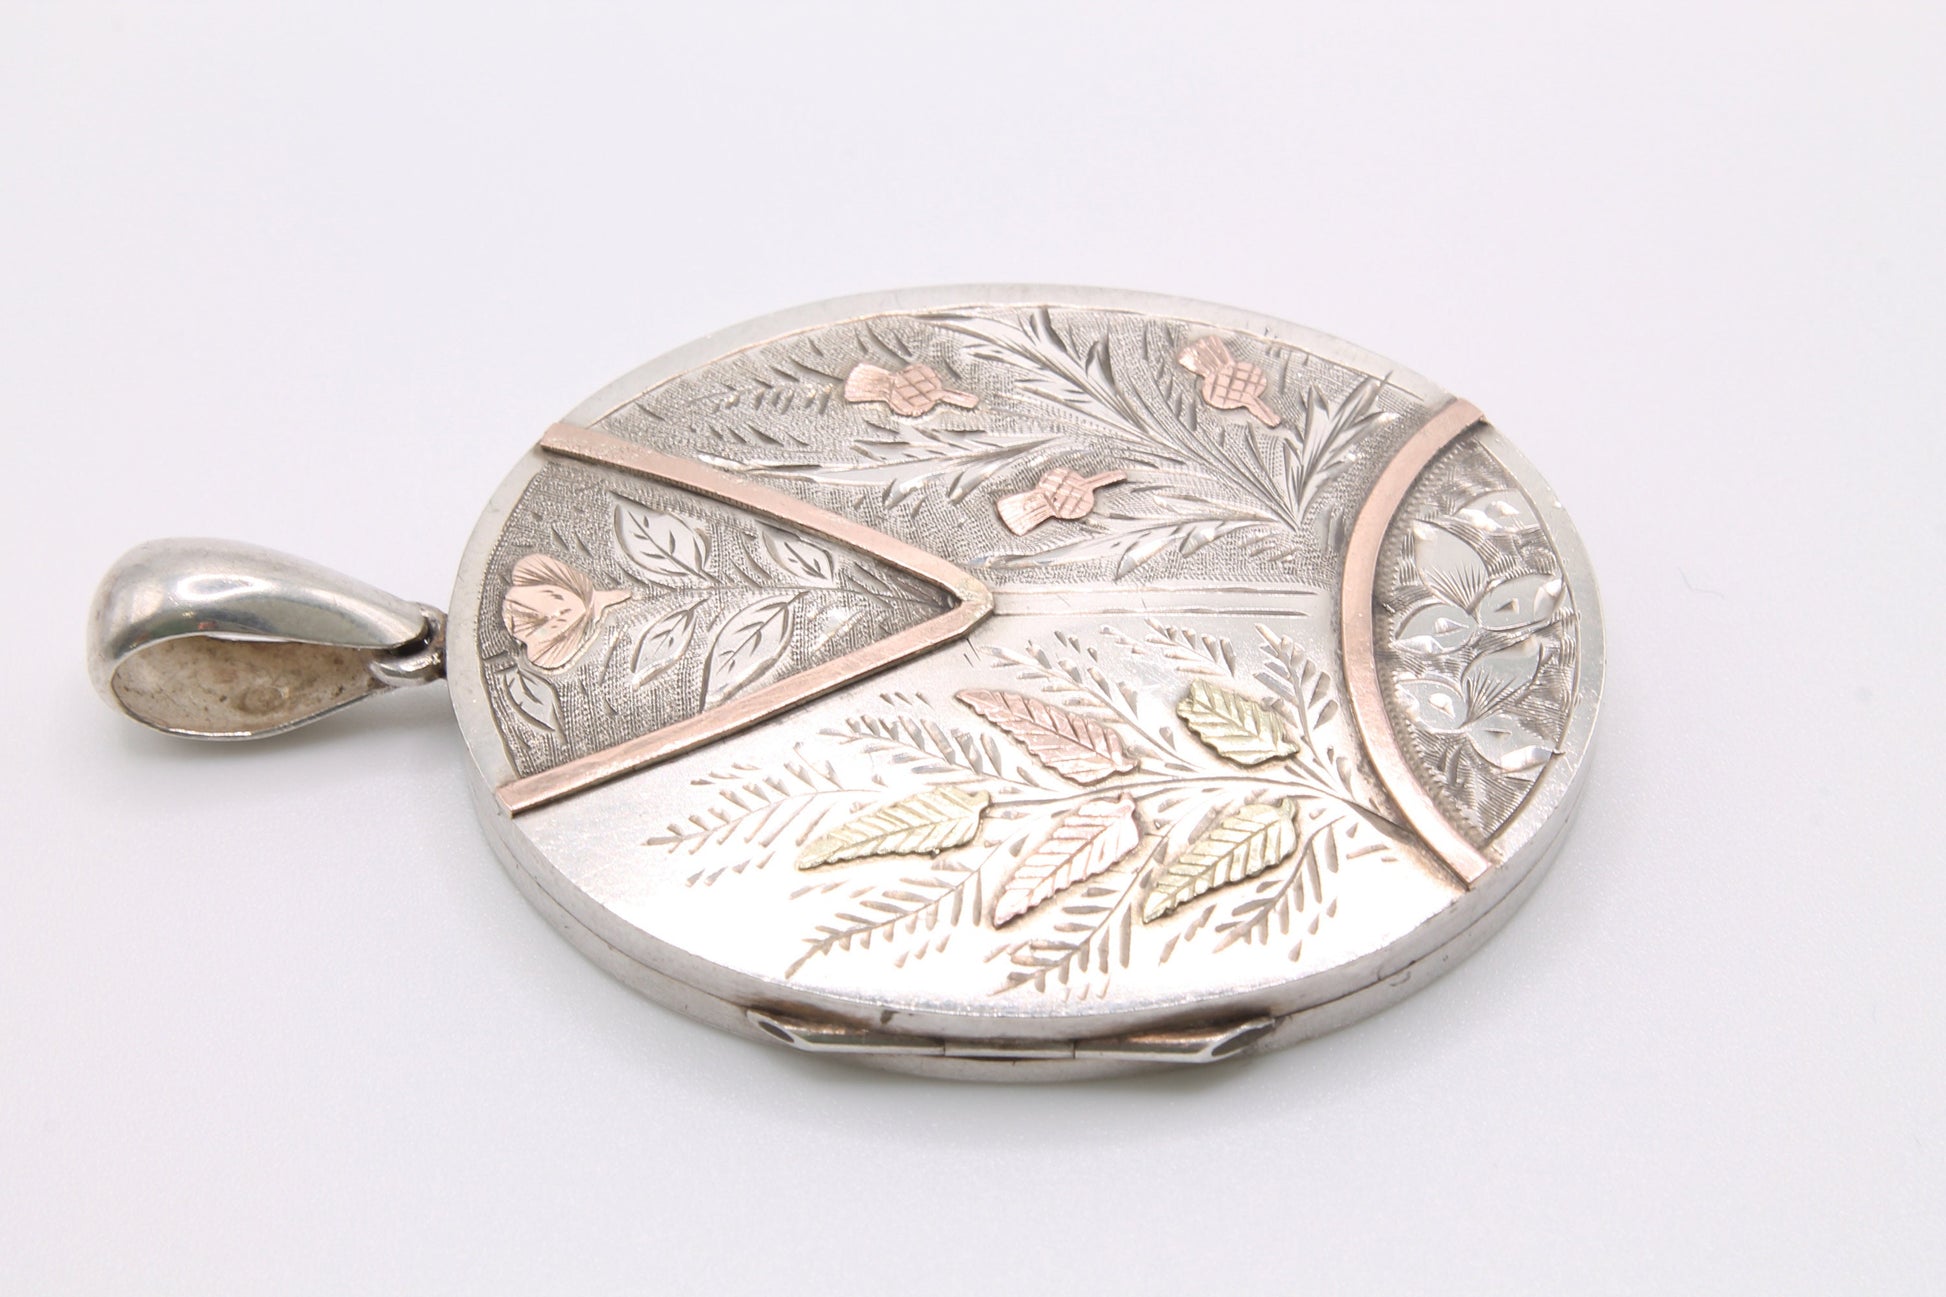 antique-victorian-silver-and-gold-locket-1881